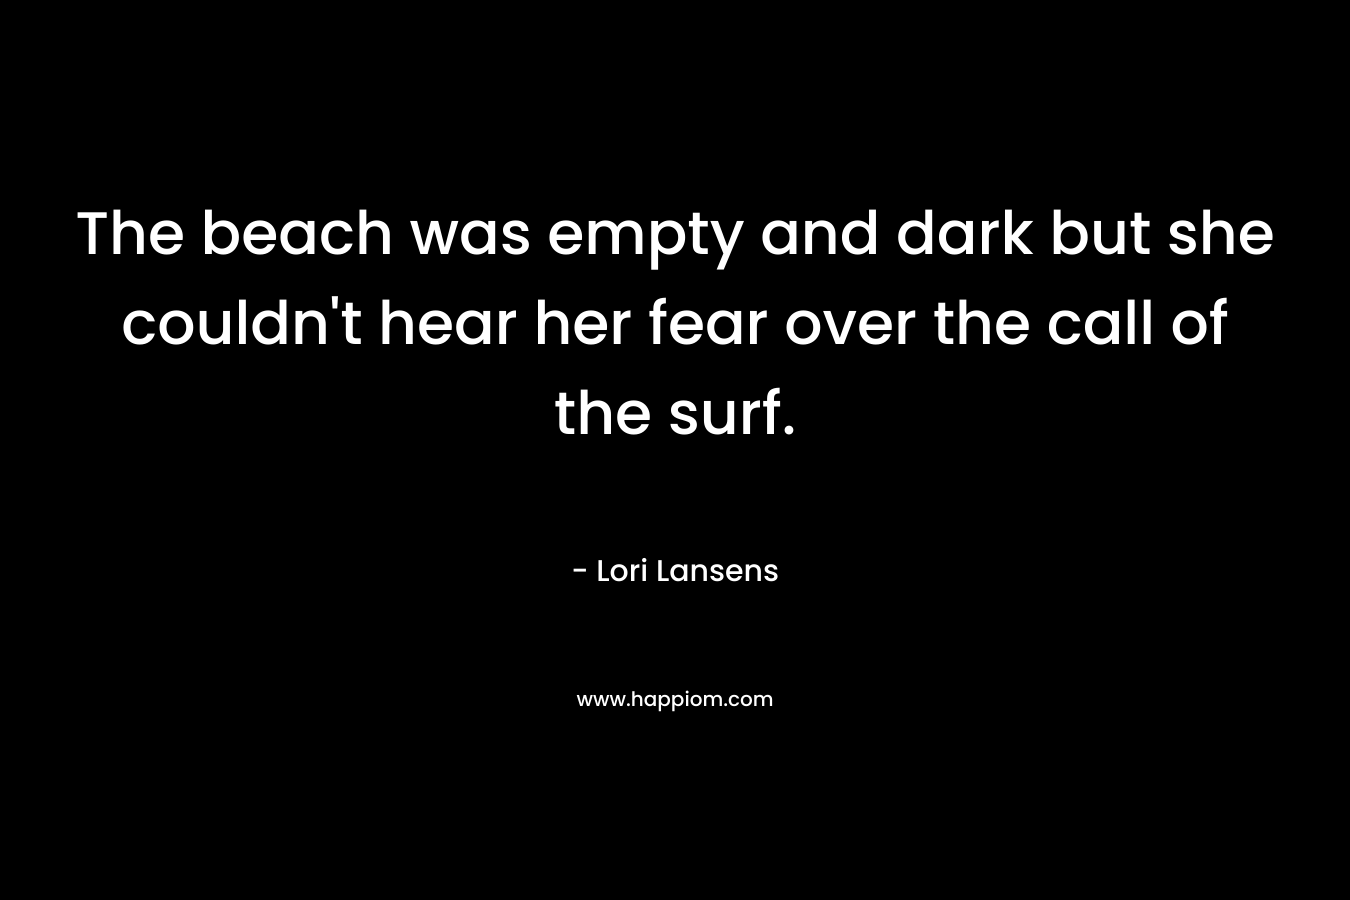 The beach was empty and dark but she couldn't hear her fear over the call of the surf.